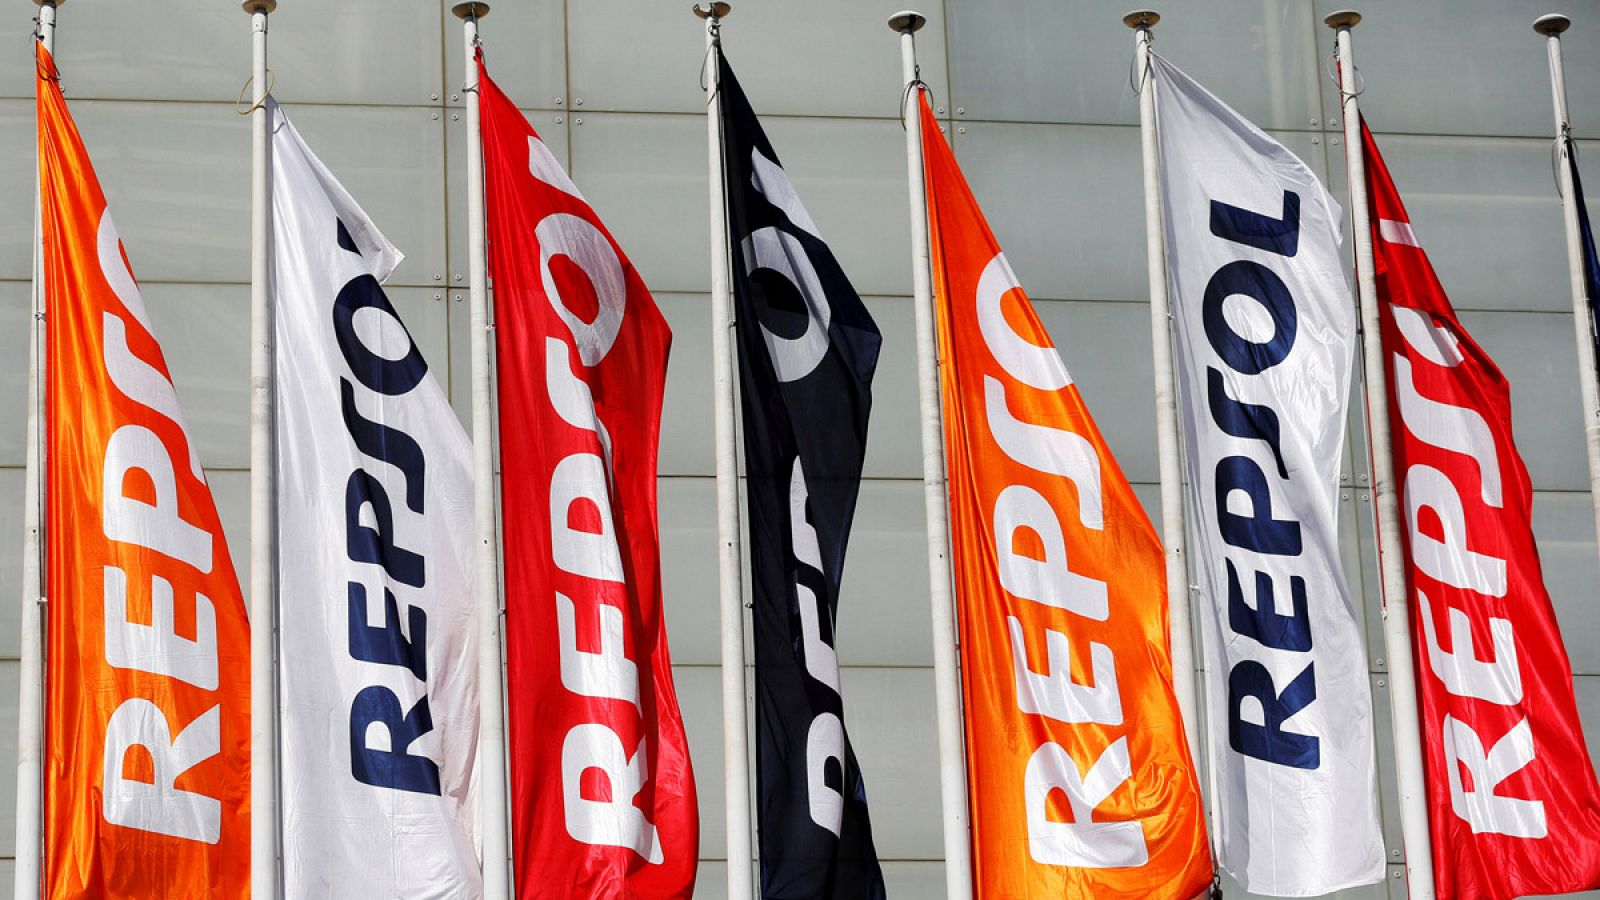 FILE PHOTO: Repsol flags are seen at a conference hall during the company's annual shareholders meeting in Madrid